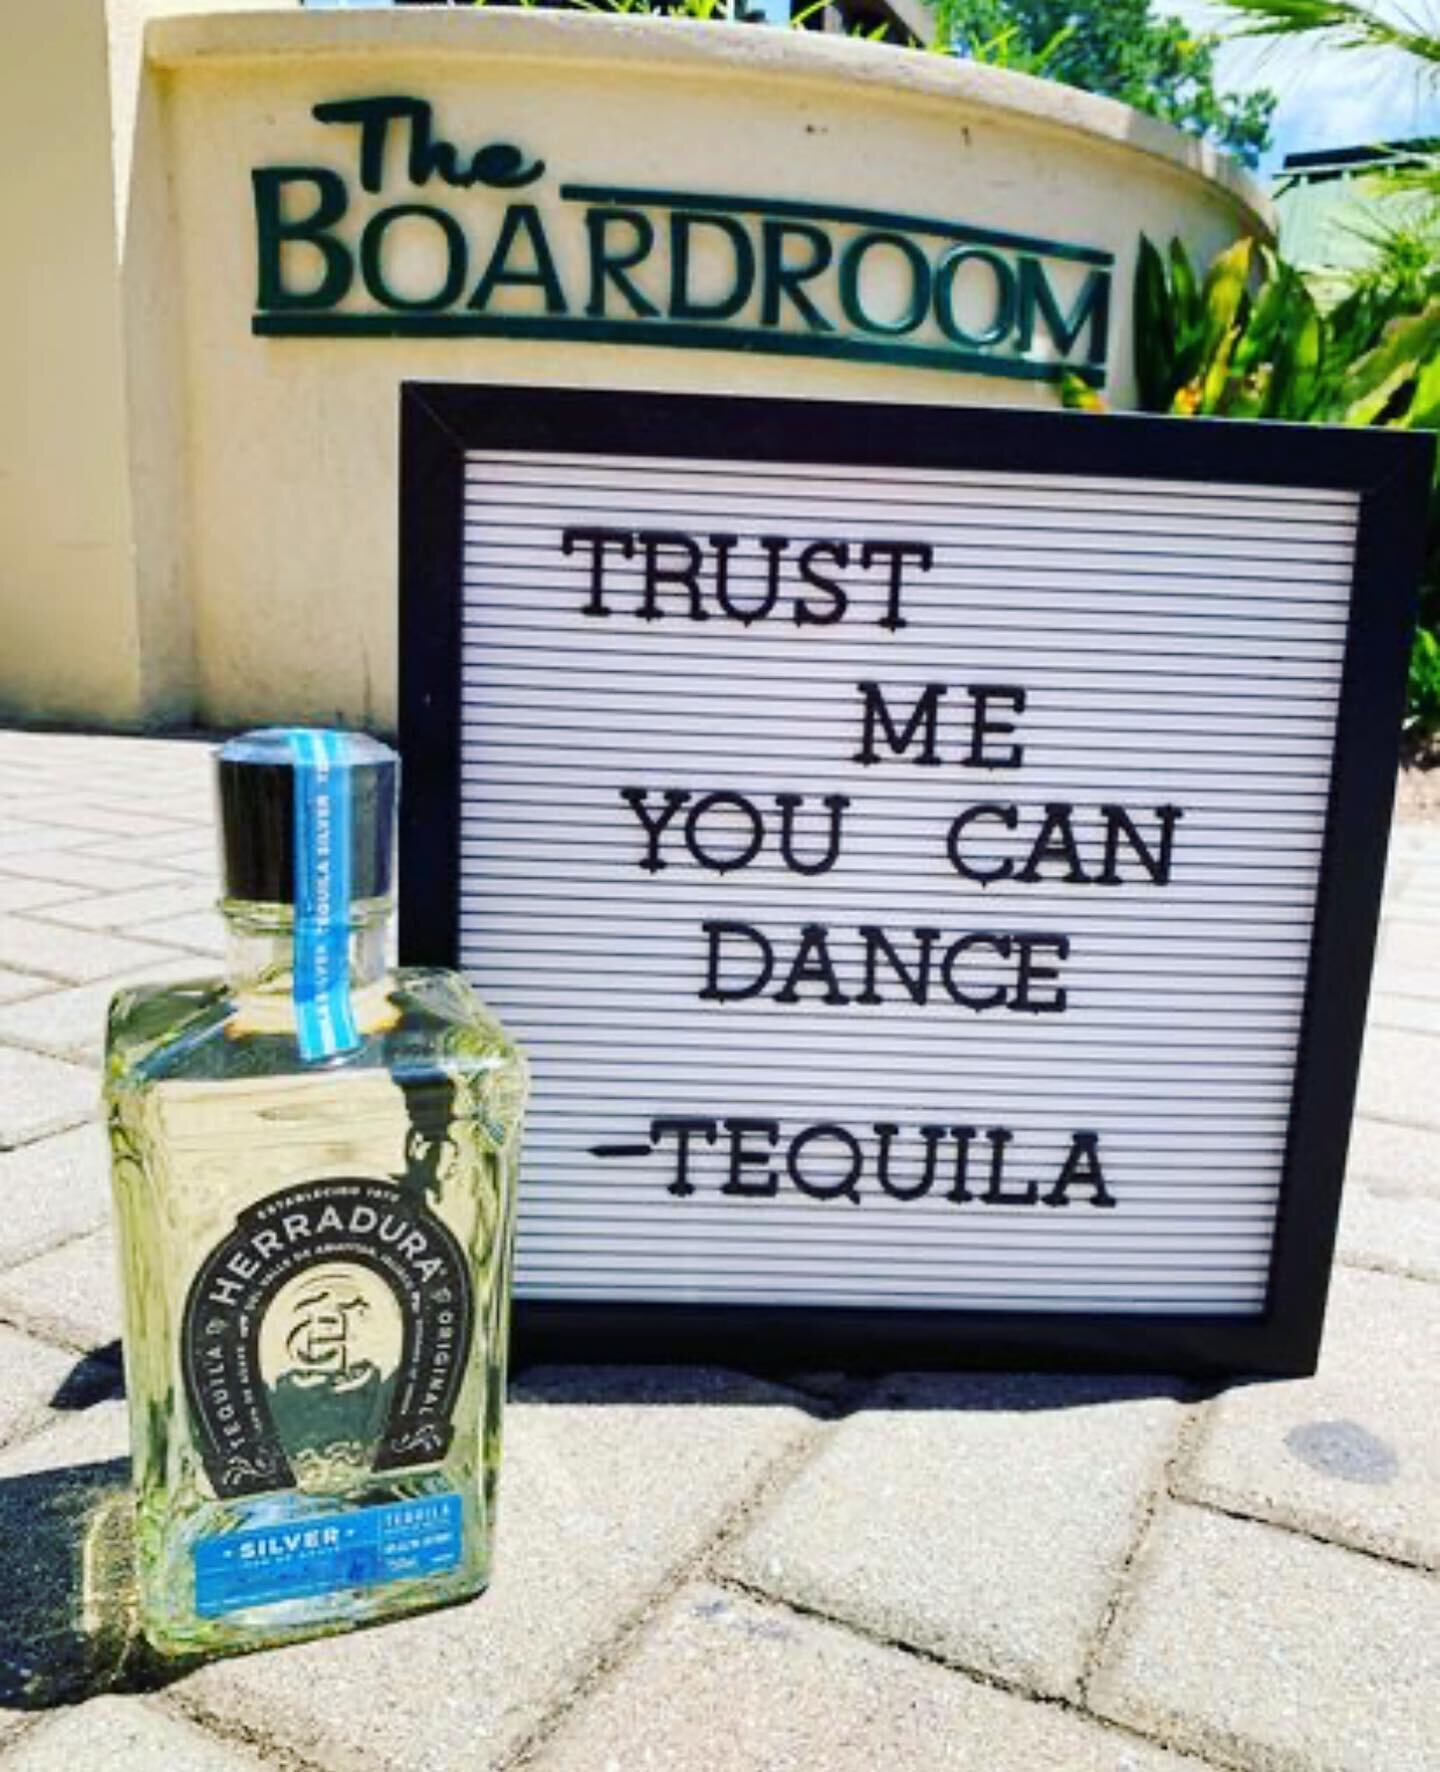 &bull;Show off your moves tonight at The Boardroom! We open at 5pm! 🤪🍻🥳

#theboardroomhhi #boardroomhhi #cocktails #tequila #youcandance #CRAB #crabgroup